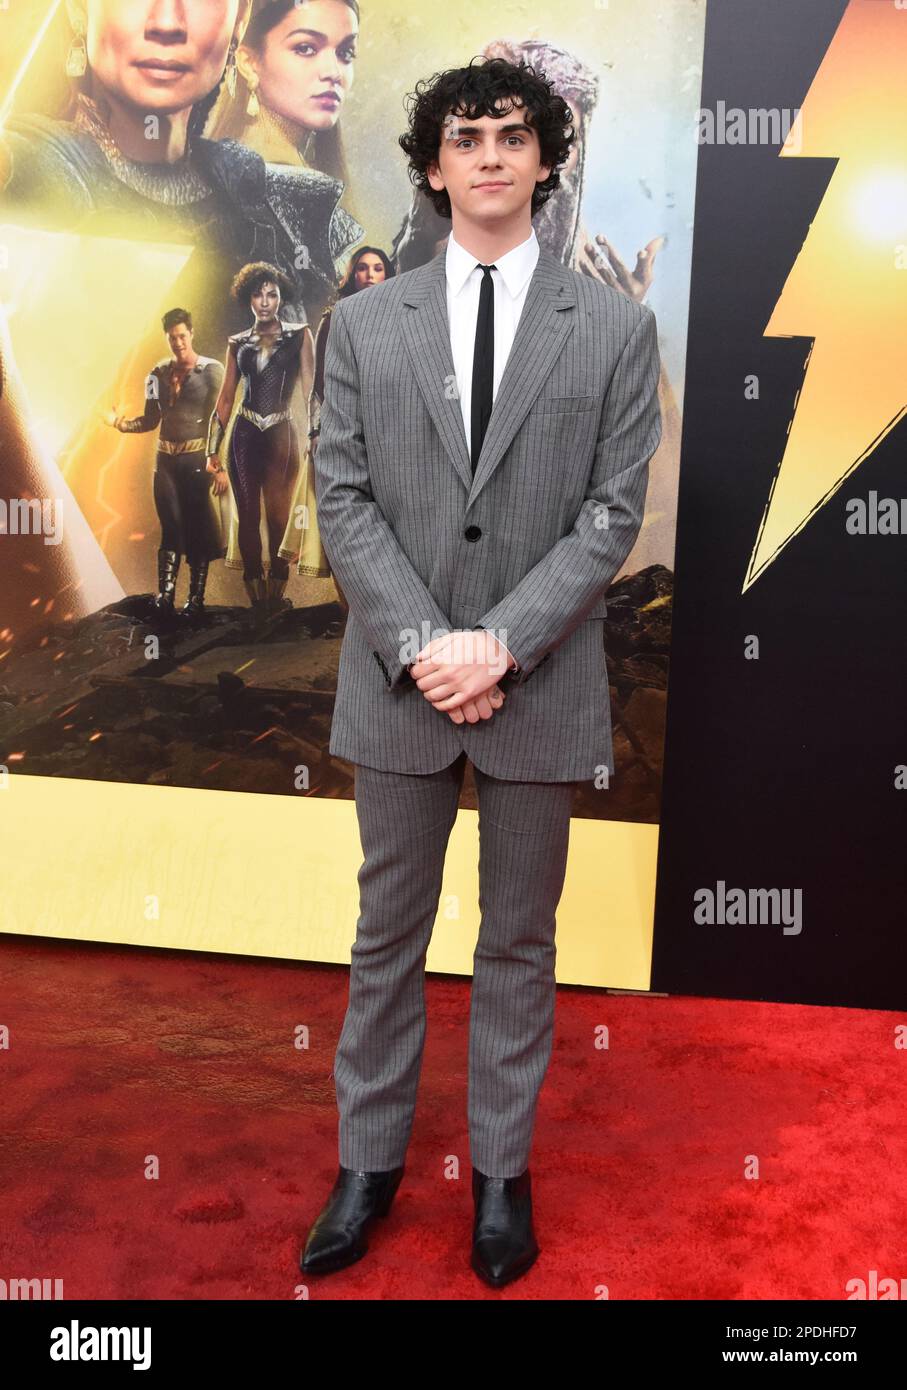 Los Angeles, California, USA 14th March 2023 Actor Jack Dylan Grazer attends the Premiere of Warner Bros. 'Shazam! Fury of the Gods' at Regency Village Theatre on March 14, 2023 in Los Angeles, California, USA. Photo by Barry King/Alamy Live News Stock Photo